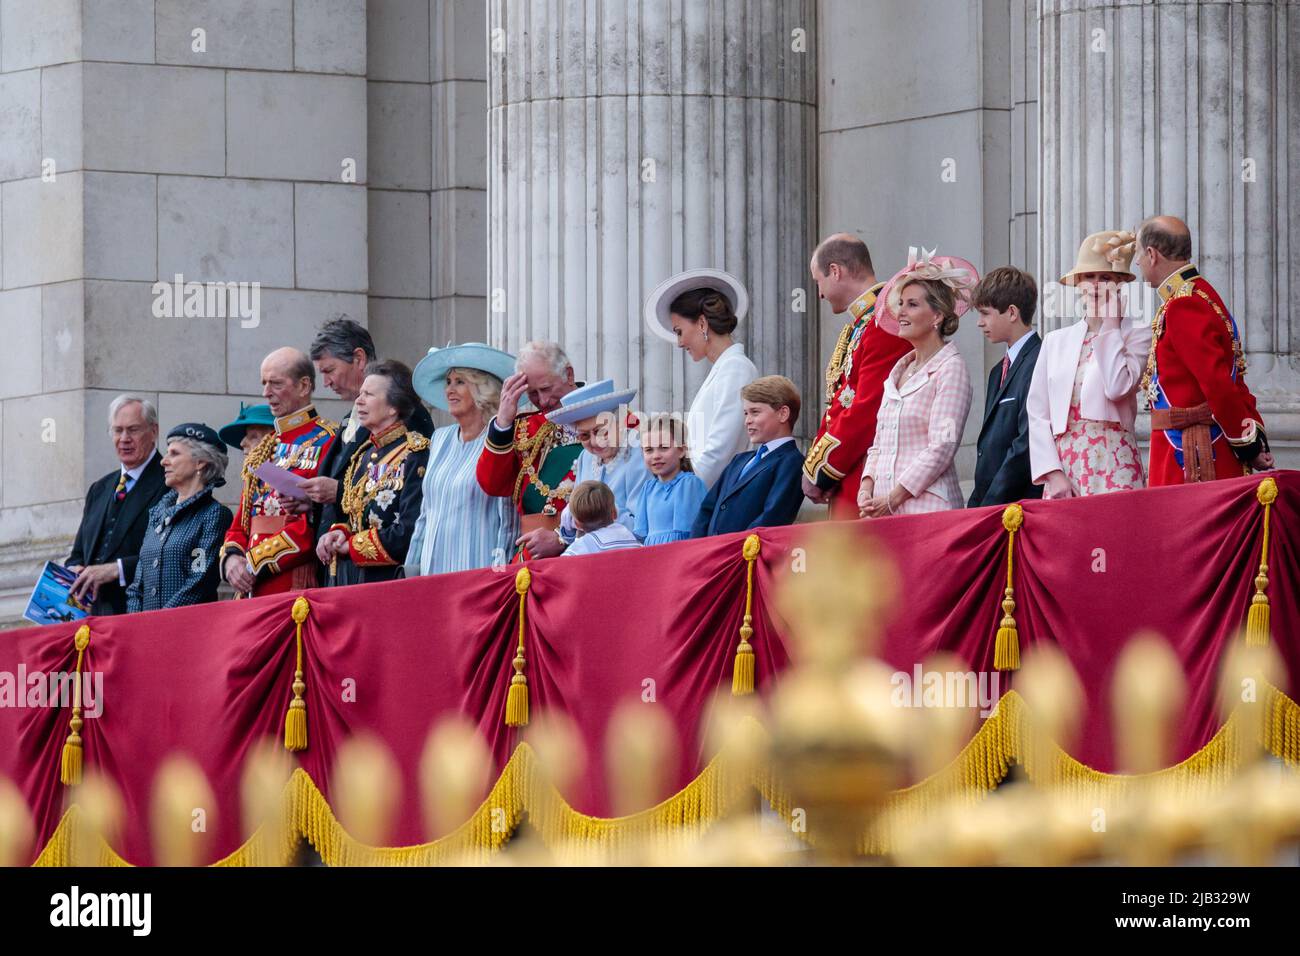 Trooping the Colour,The Queen’s Birthday Parade, London, UK. 2nd June 2022. The Queen and the members of the Royal Family make an appearance on the Buckingham Palace balcony for the traditional flypast finale to The Trooping of the Colour, a ceremonial parade to mark Her Majesty The Queen's official birthday. Amanda Rose/Alamy Live News Stock Photo